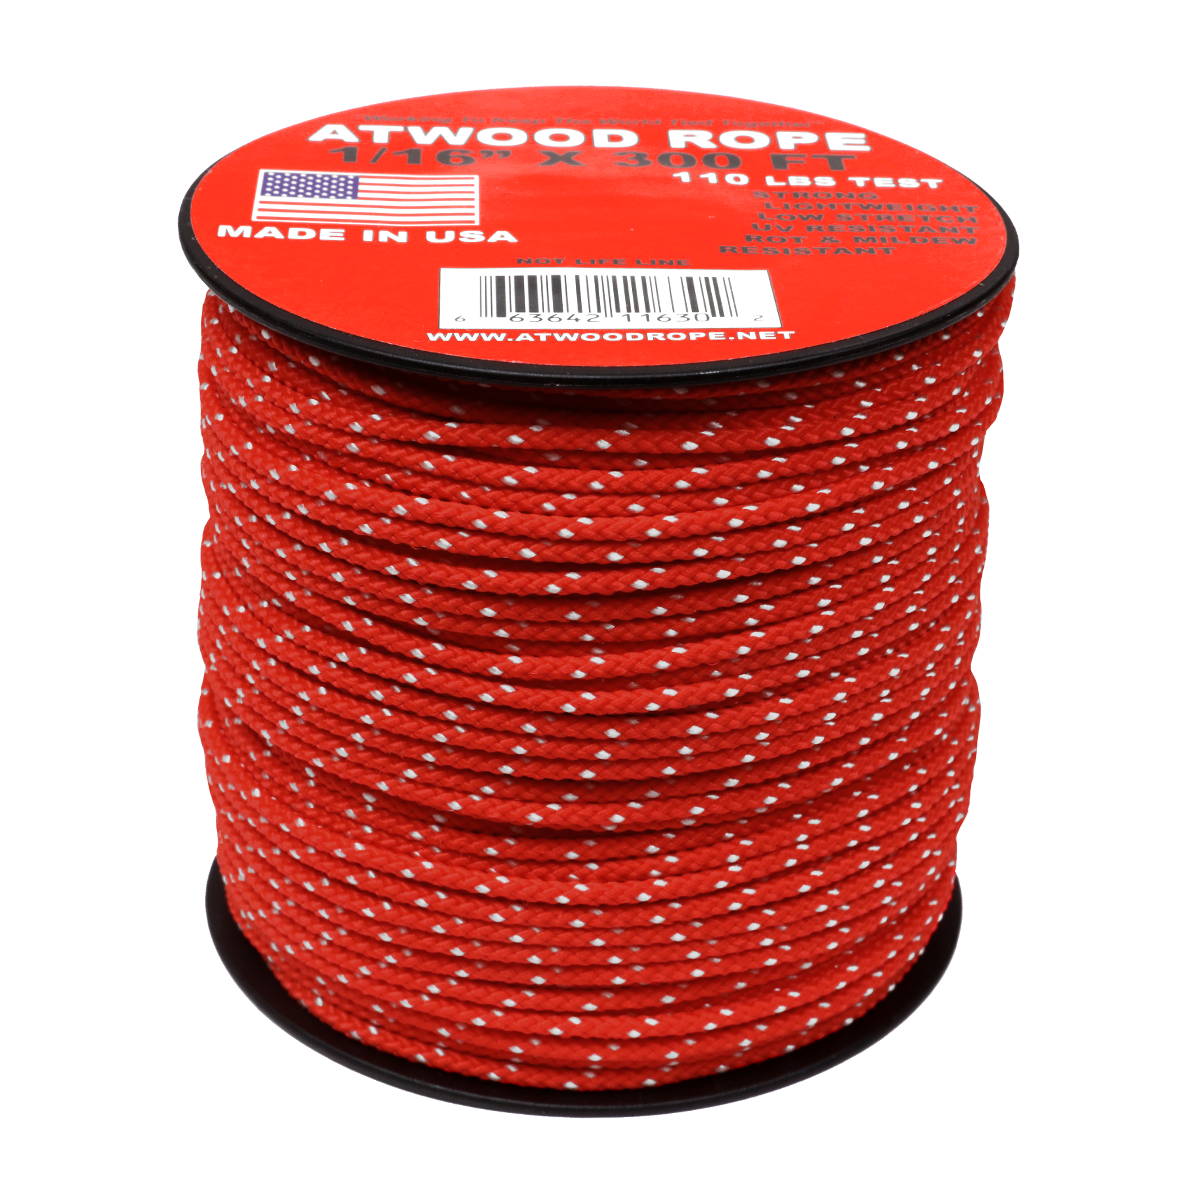 Shop R&W Rope 10MM MARLIN X 356FT (WHITE W/ RED TRACER) - CUT LENGTH - In  Stock & Ready To Ship - R&W Rope Sales Shop 